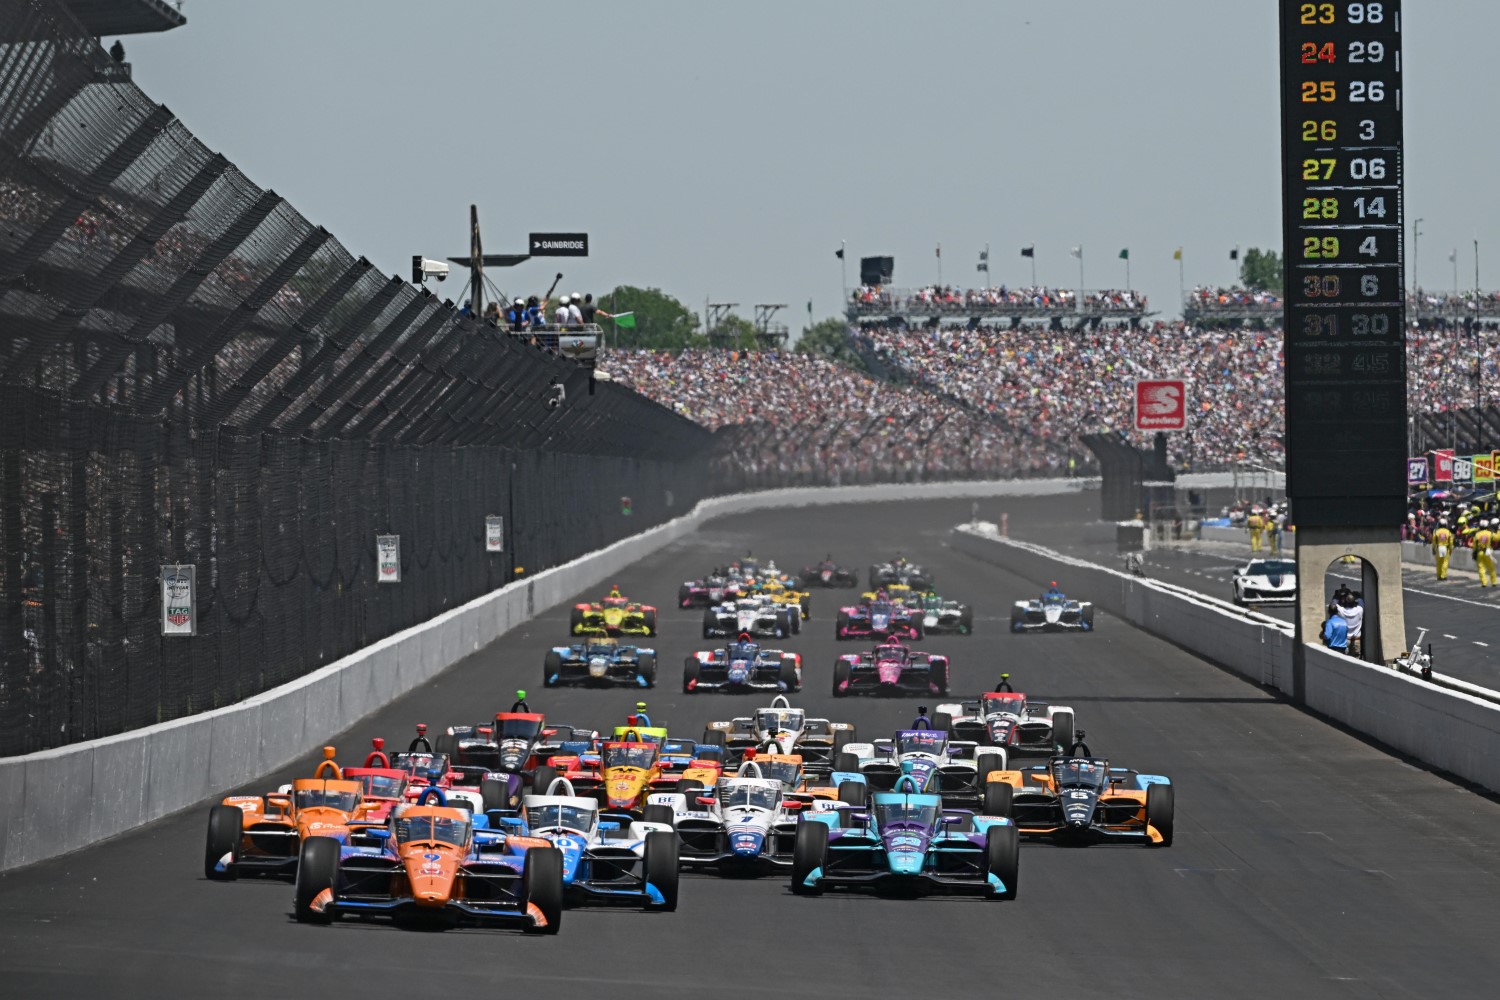 IndyCar Indy 500 Wins ‘Best Motorsports Race’ Award from USA TODAY